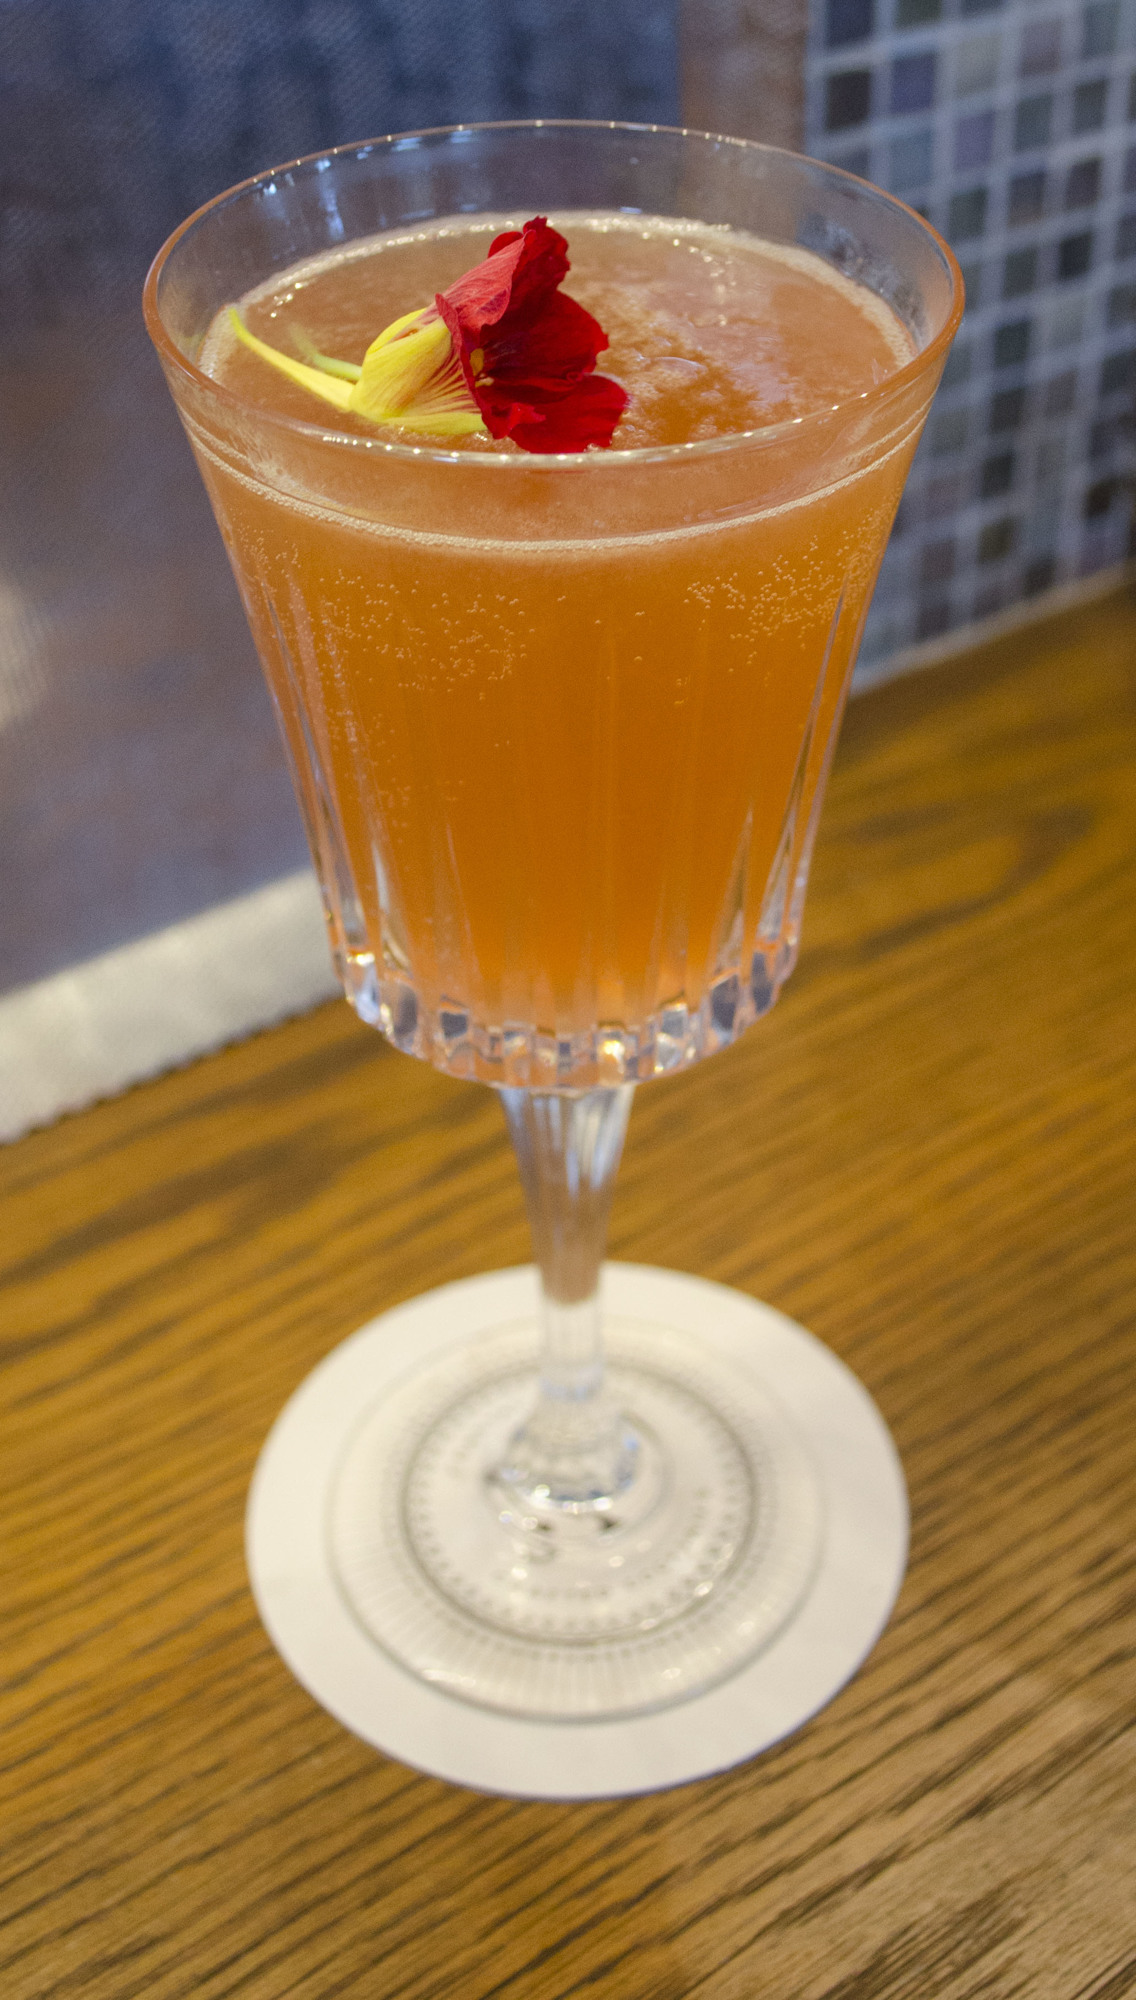 The Sonic Bloom is one of the only sparkling beverages on the spring menu. Photo by Niki Kottmann